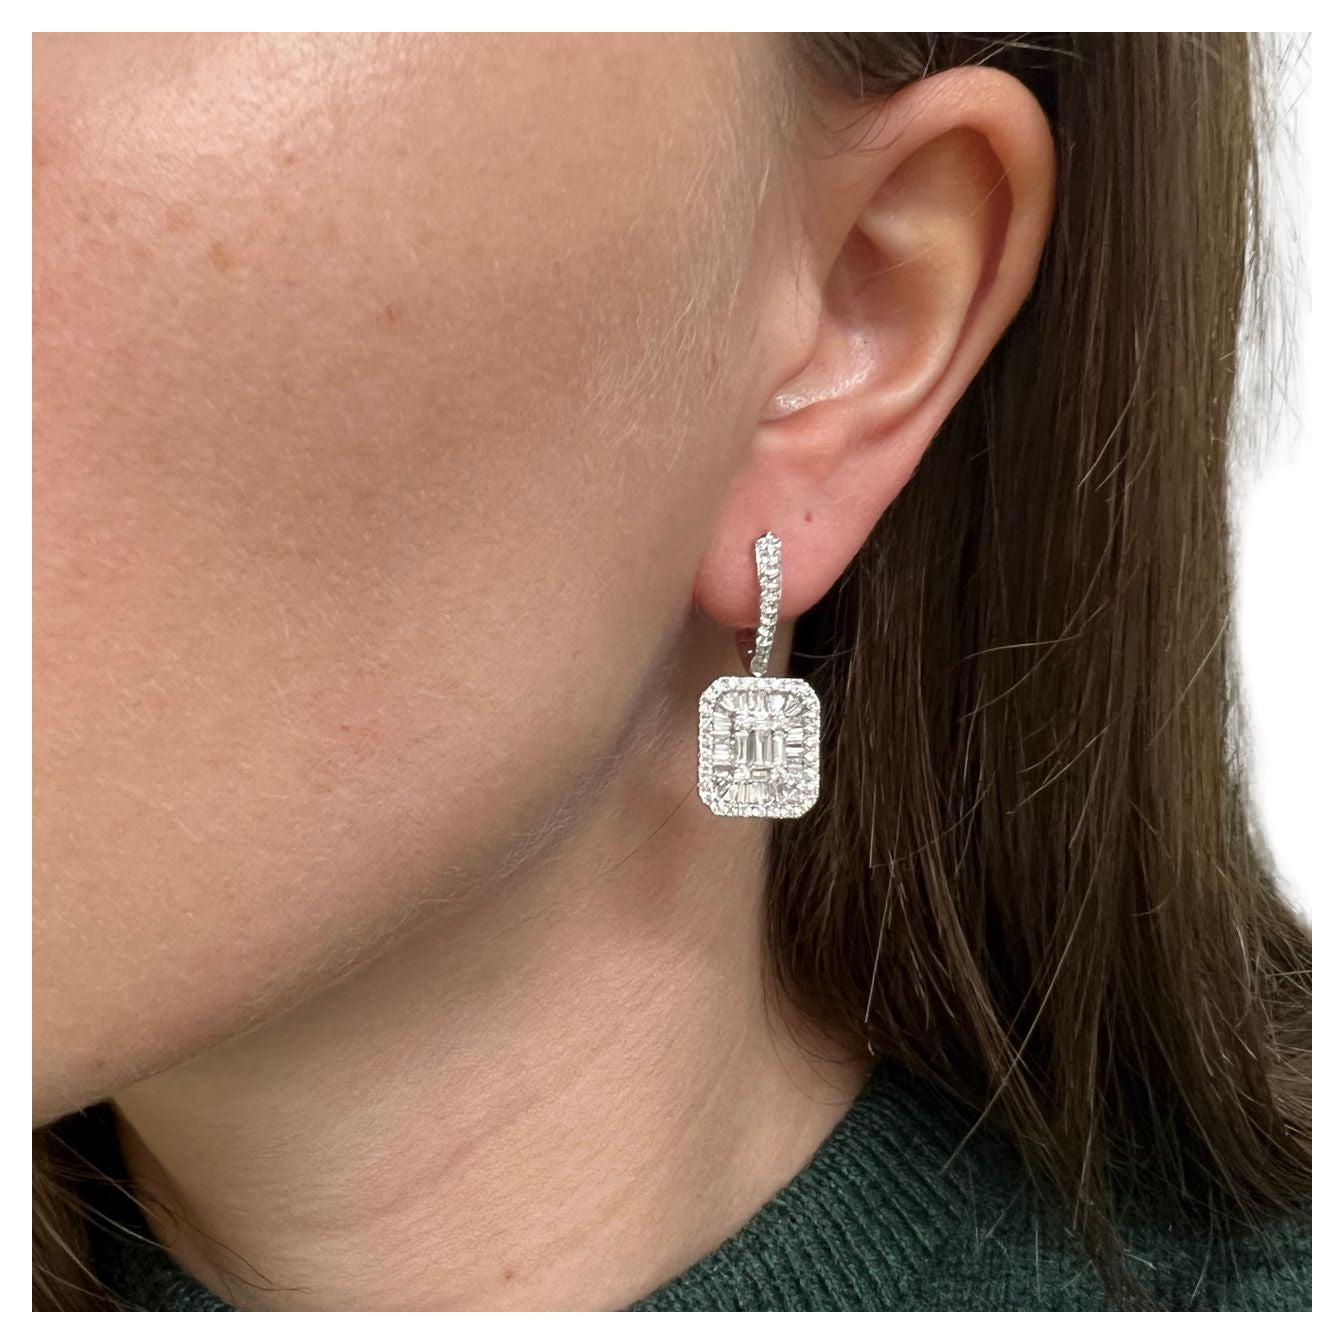 An exquisite pair of dangle earrings
set in 18 carats White Gold with Baguette Round Diamond Cluster earrings

color F/G clarity VS

